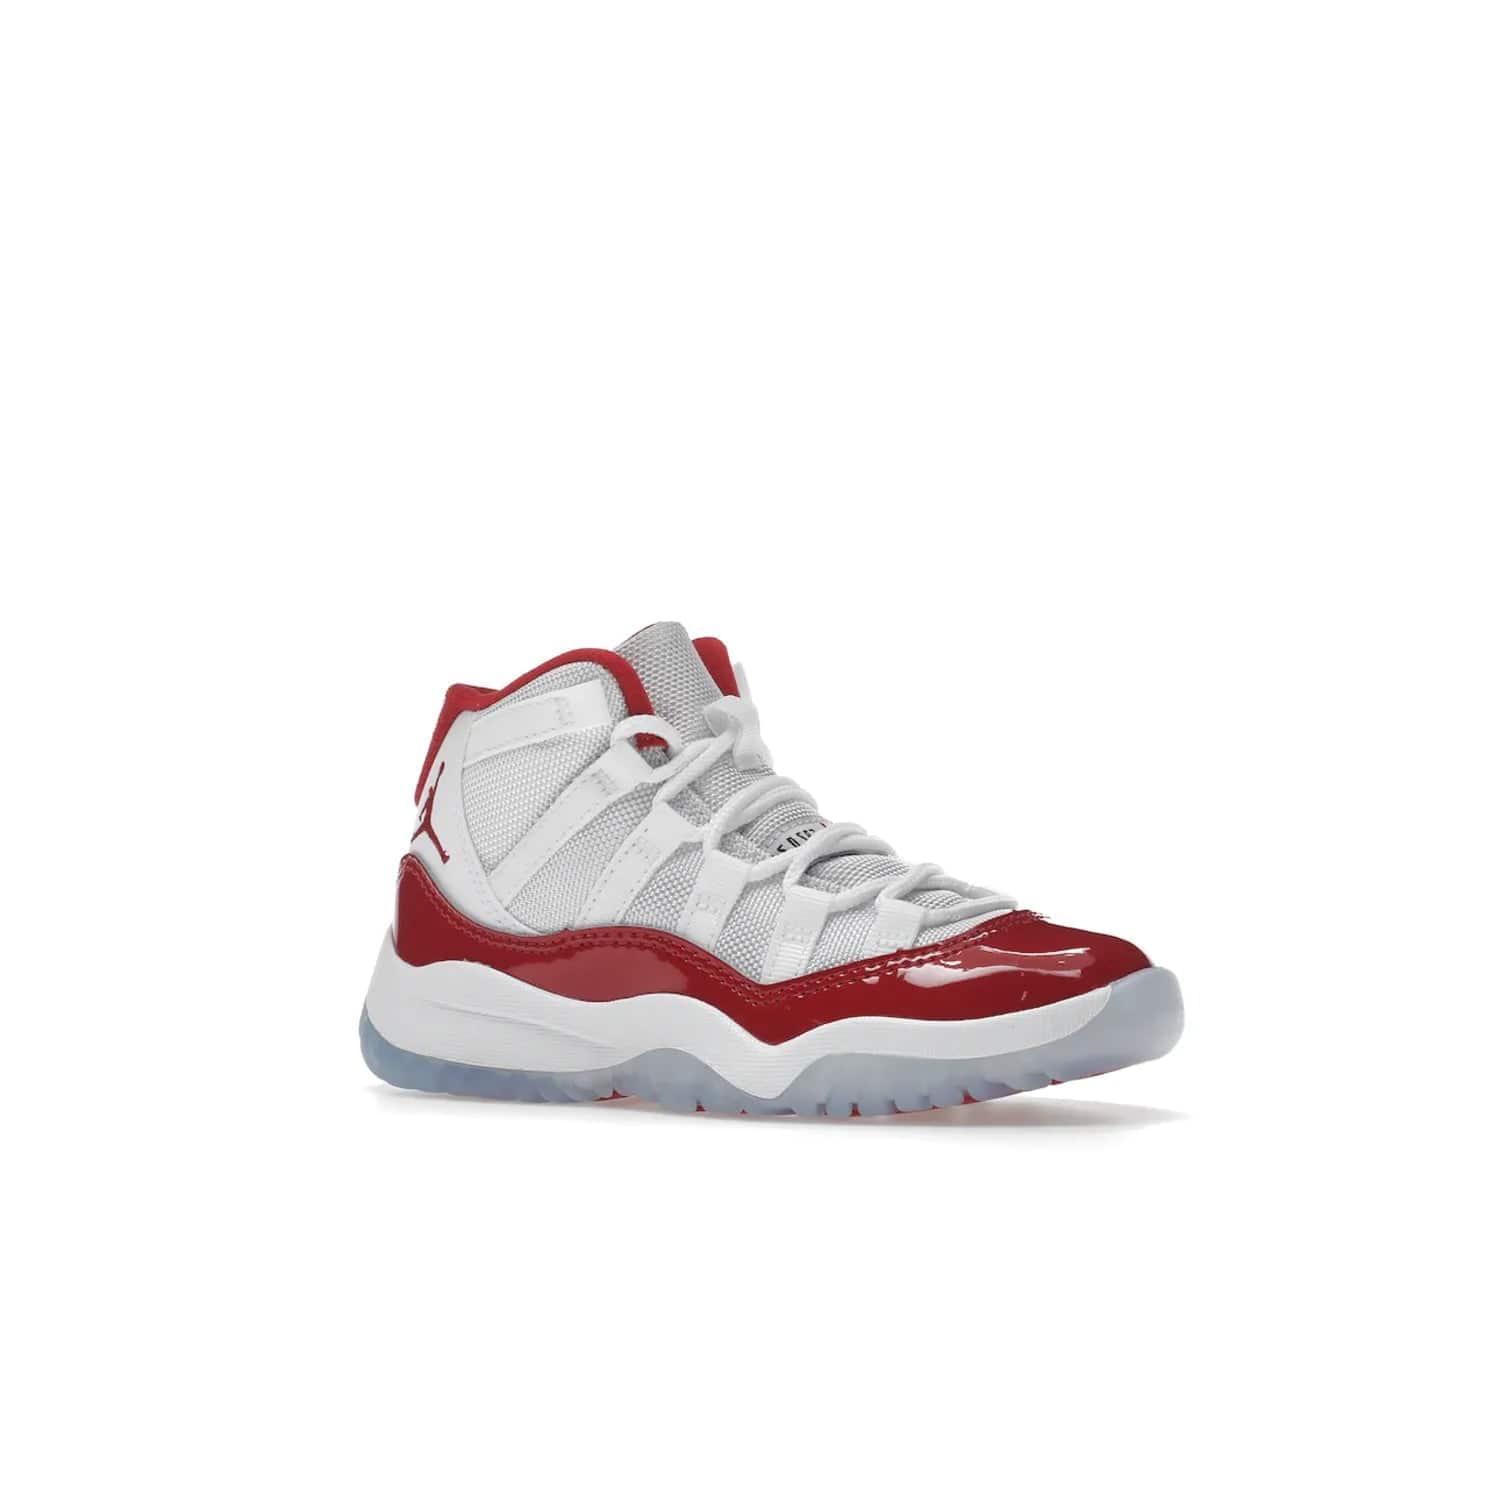 Jordan 11 Retro Cherry (2022) (PS) - Image 4 - Only at www.BallersClubKickz.com - An iconic silhouette with a timeless look, the Air Jordan 11 Retro Cherry 2022 PS features a crisp White, Varsity Red and Black colorway. The upper is made of ballistic mesh, a red patent leather mudguard, '23' branding and white Phylon midsole. Get optimal cushioning and comfort on December 10th, 2022. Don't miss out.